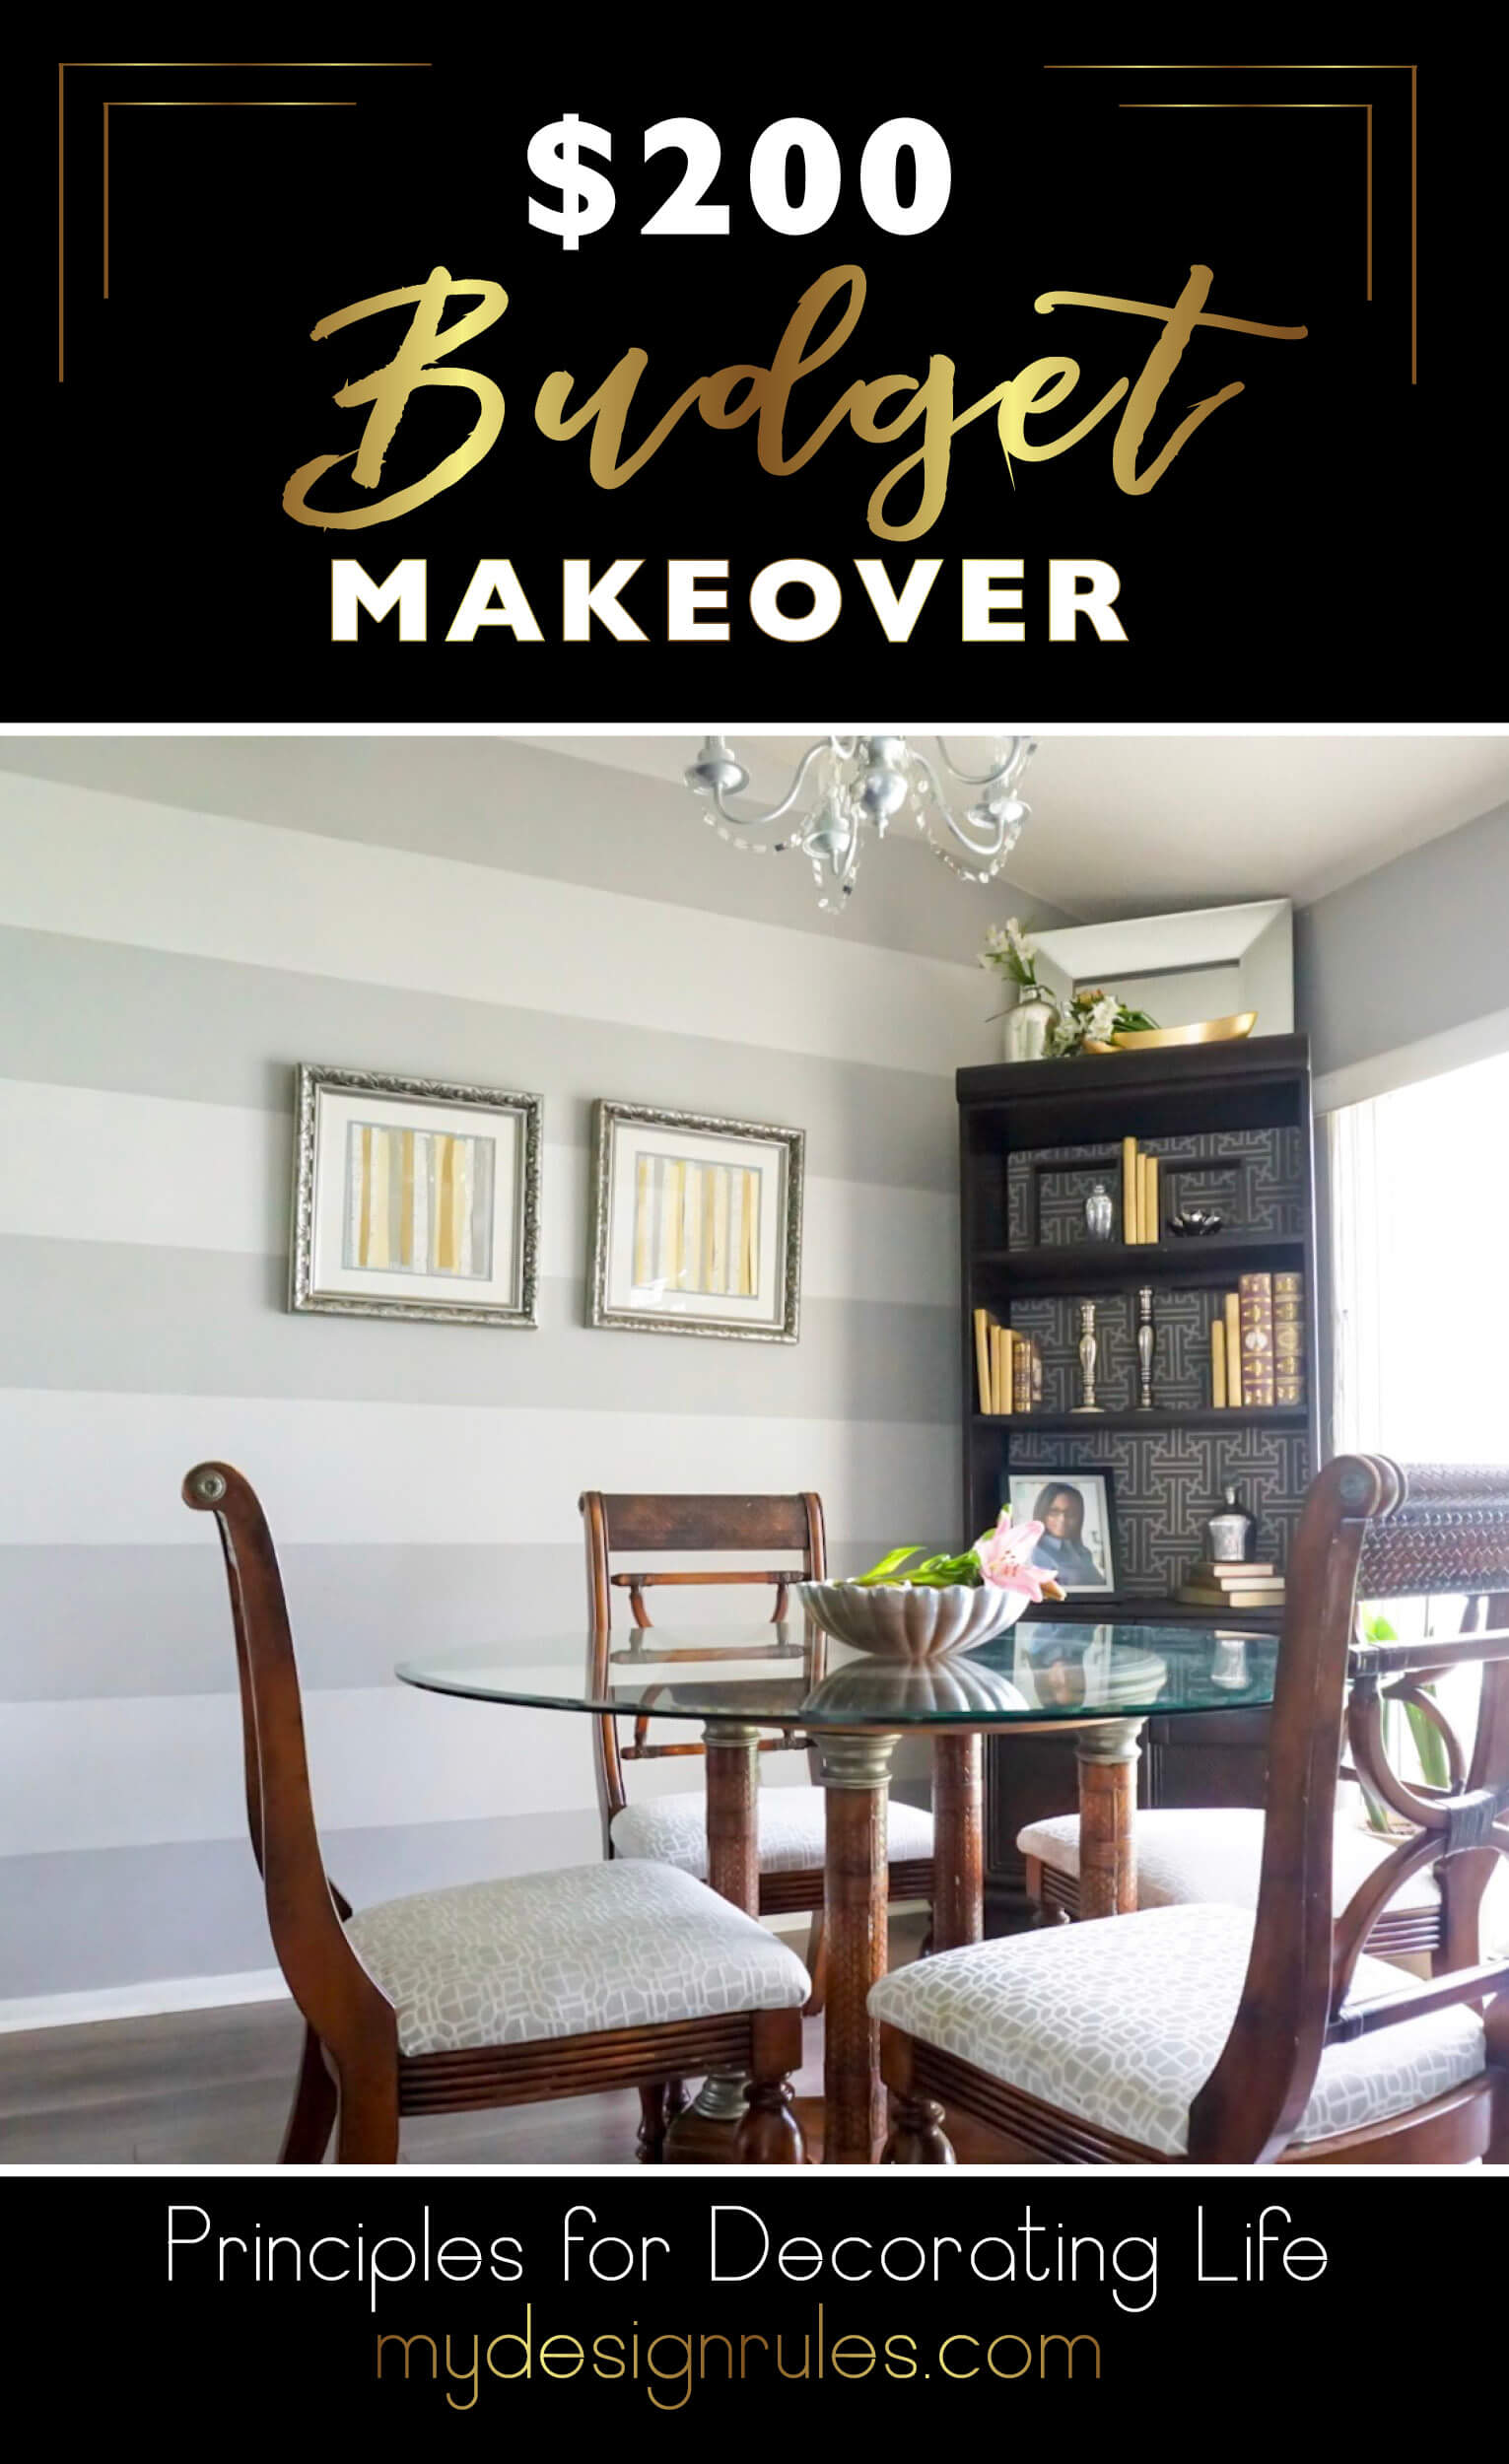 Give your dining room a makeover on a budget. Decorate a fabulous room on a budget.